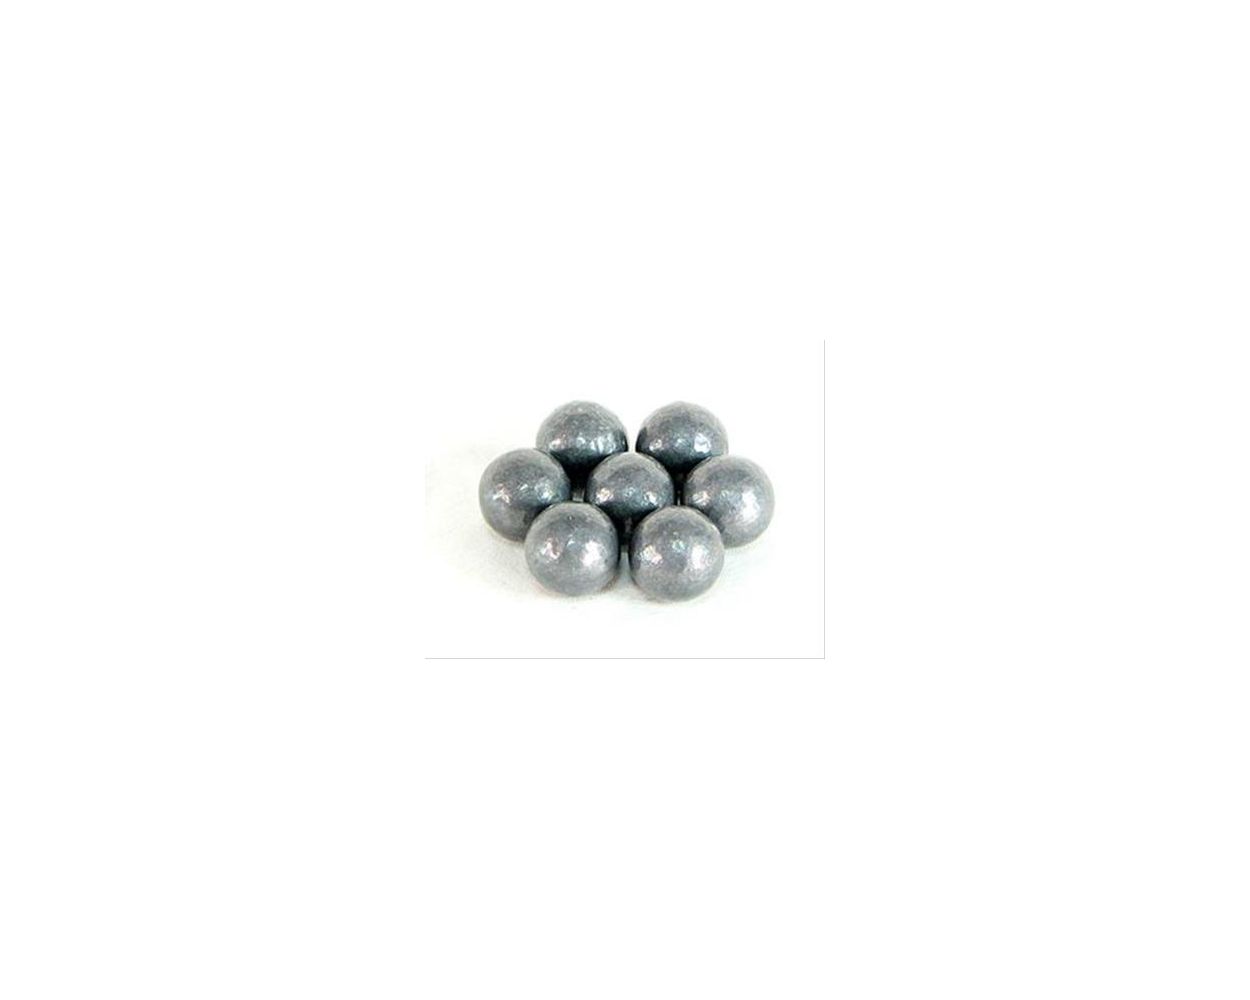 480 50 Caliber Hornady Swaged Lead Round Balls Box Of 100